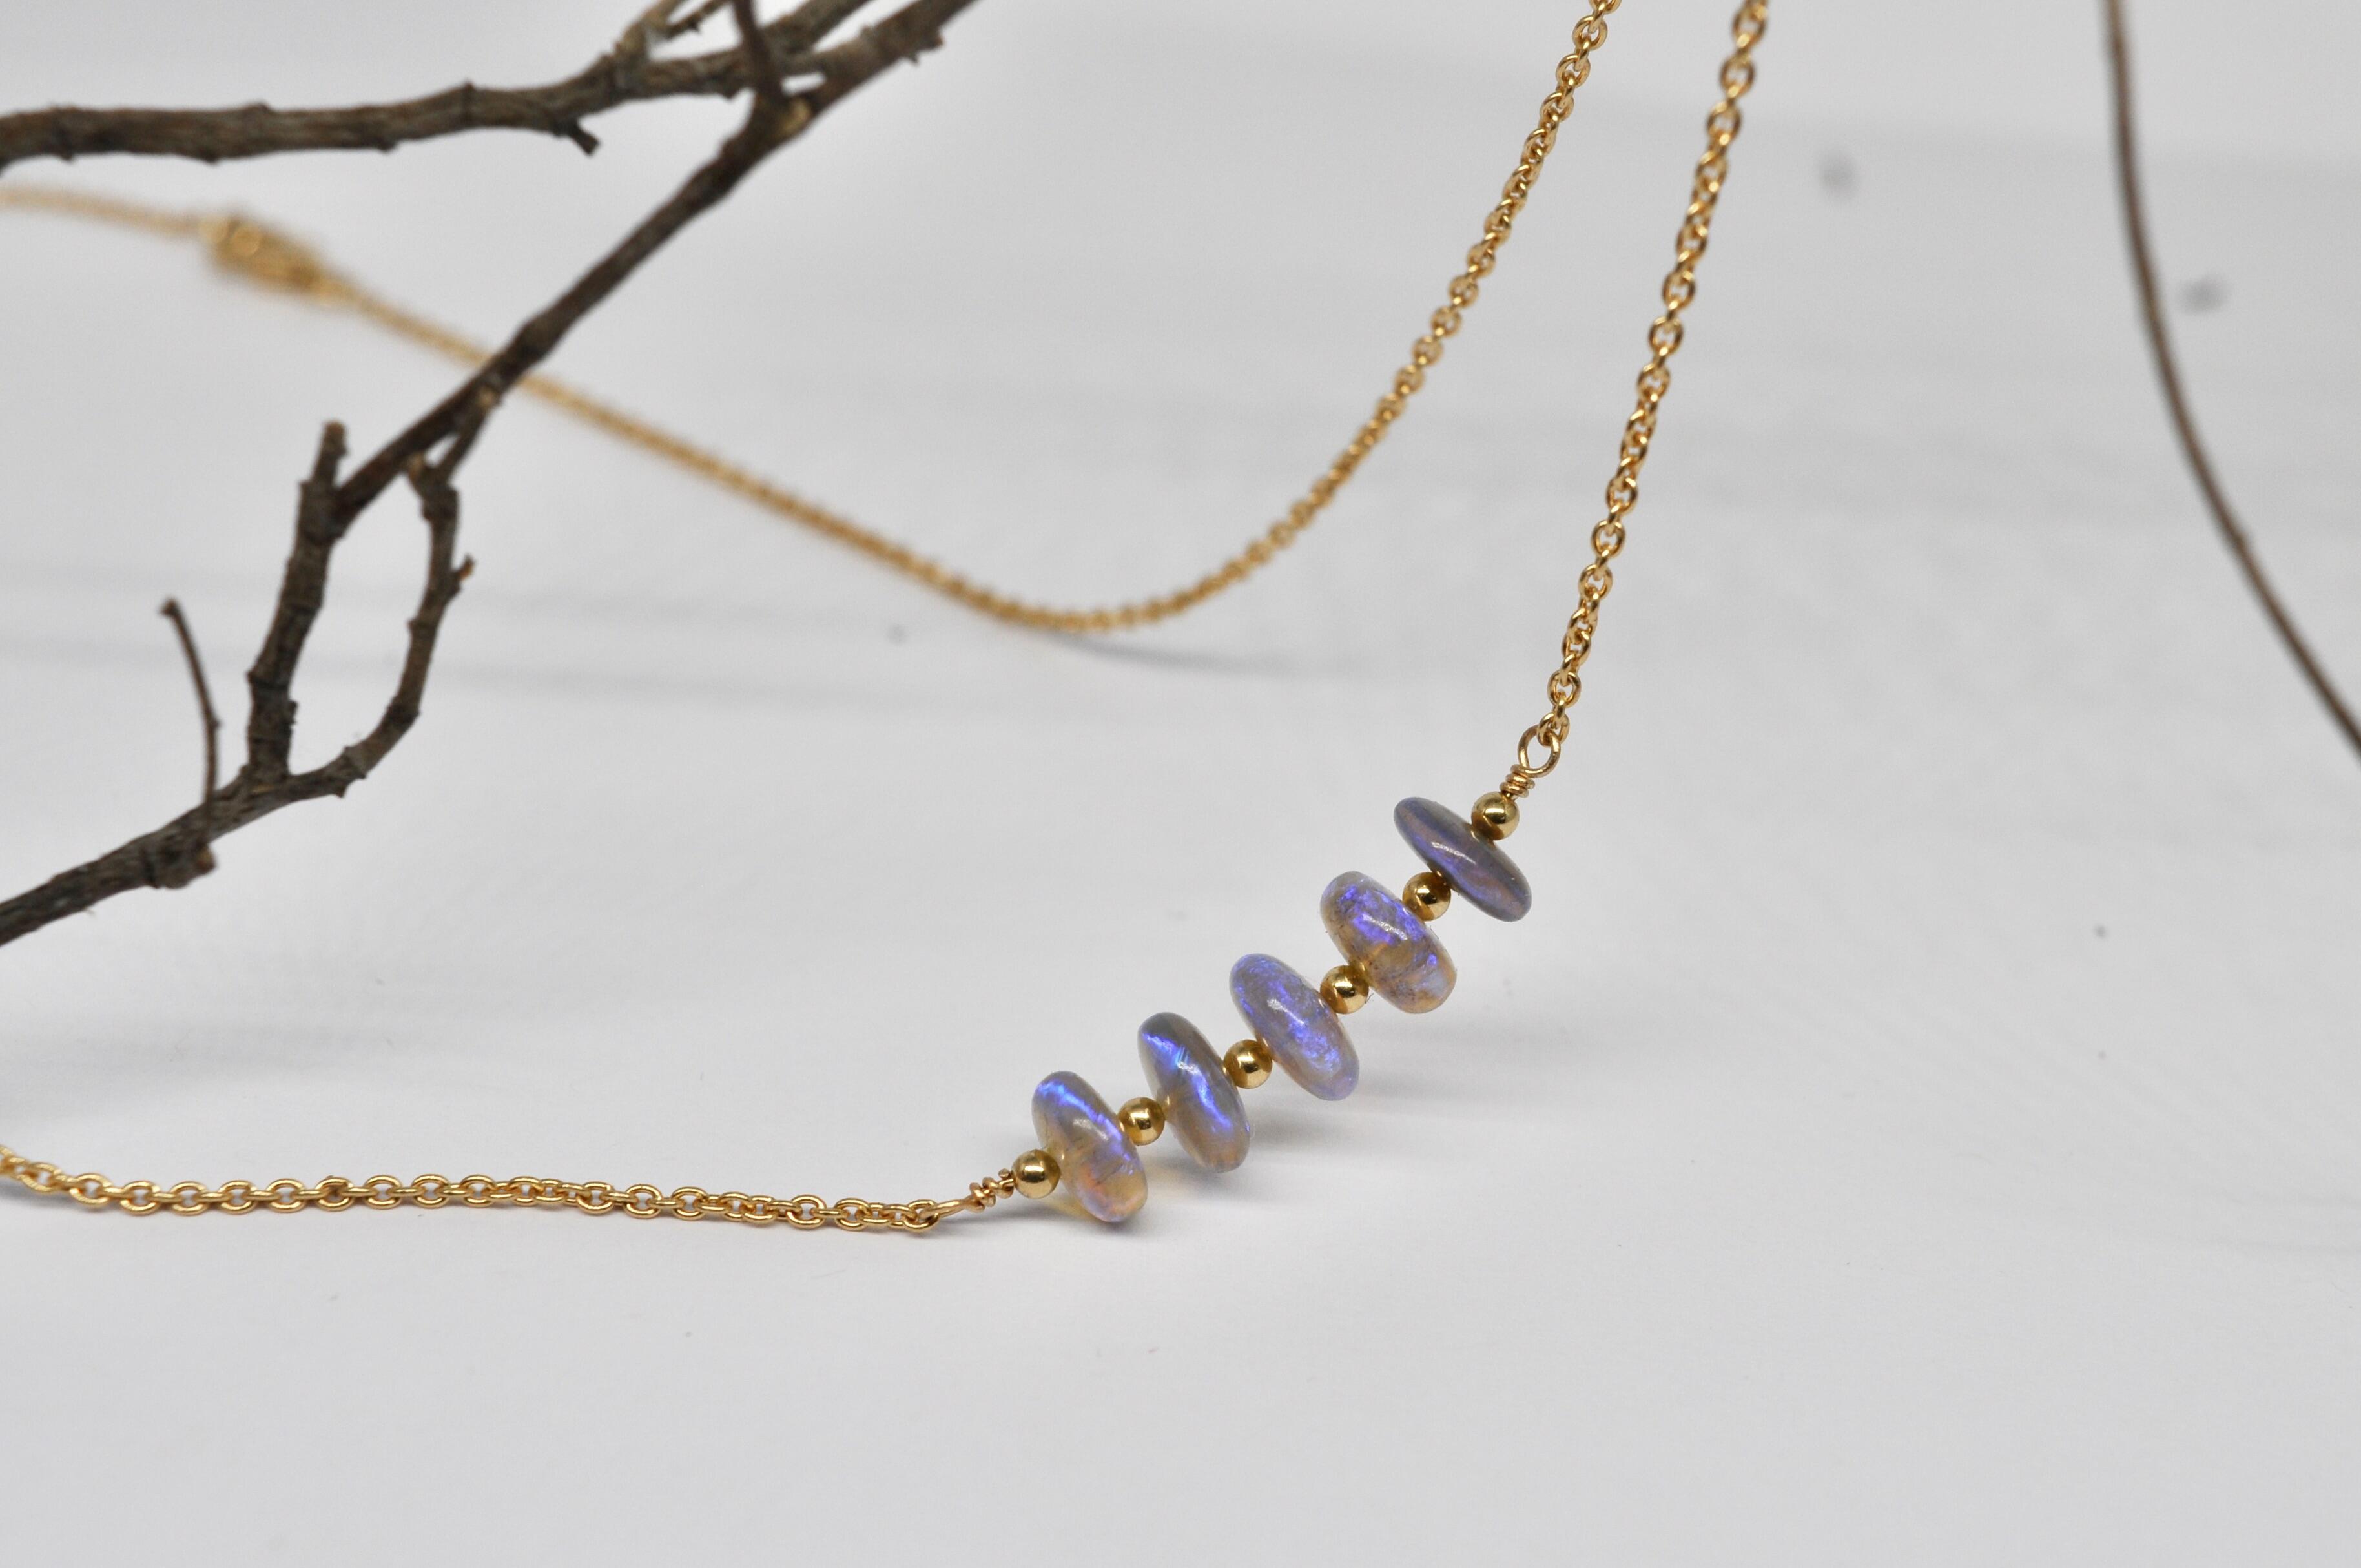 Black opal necklace, yellow gold